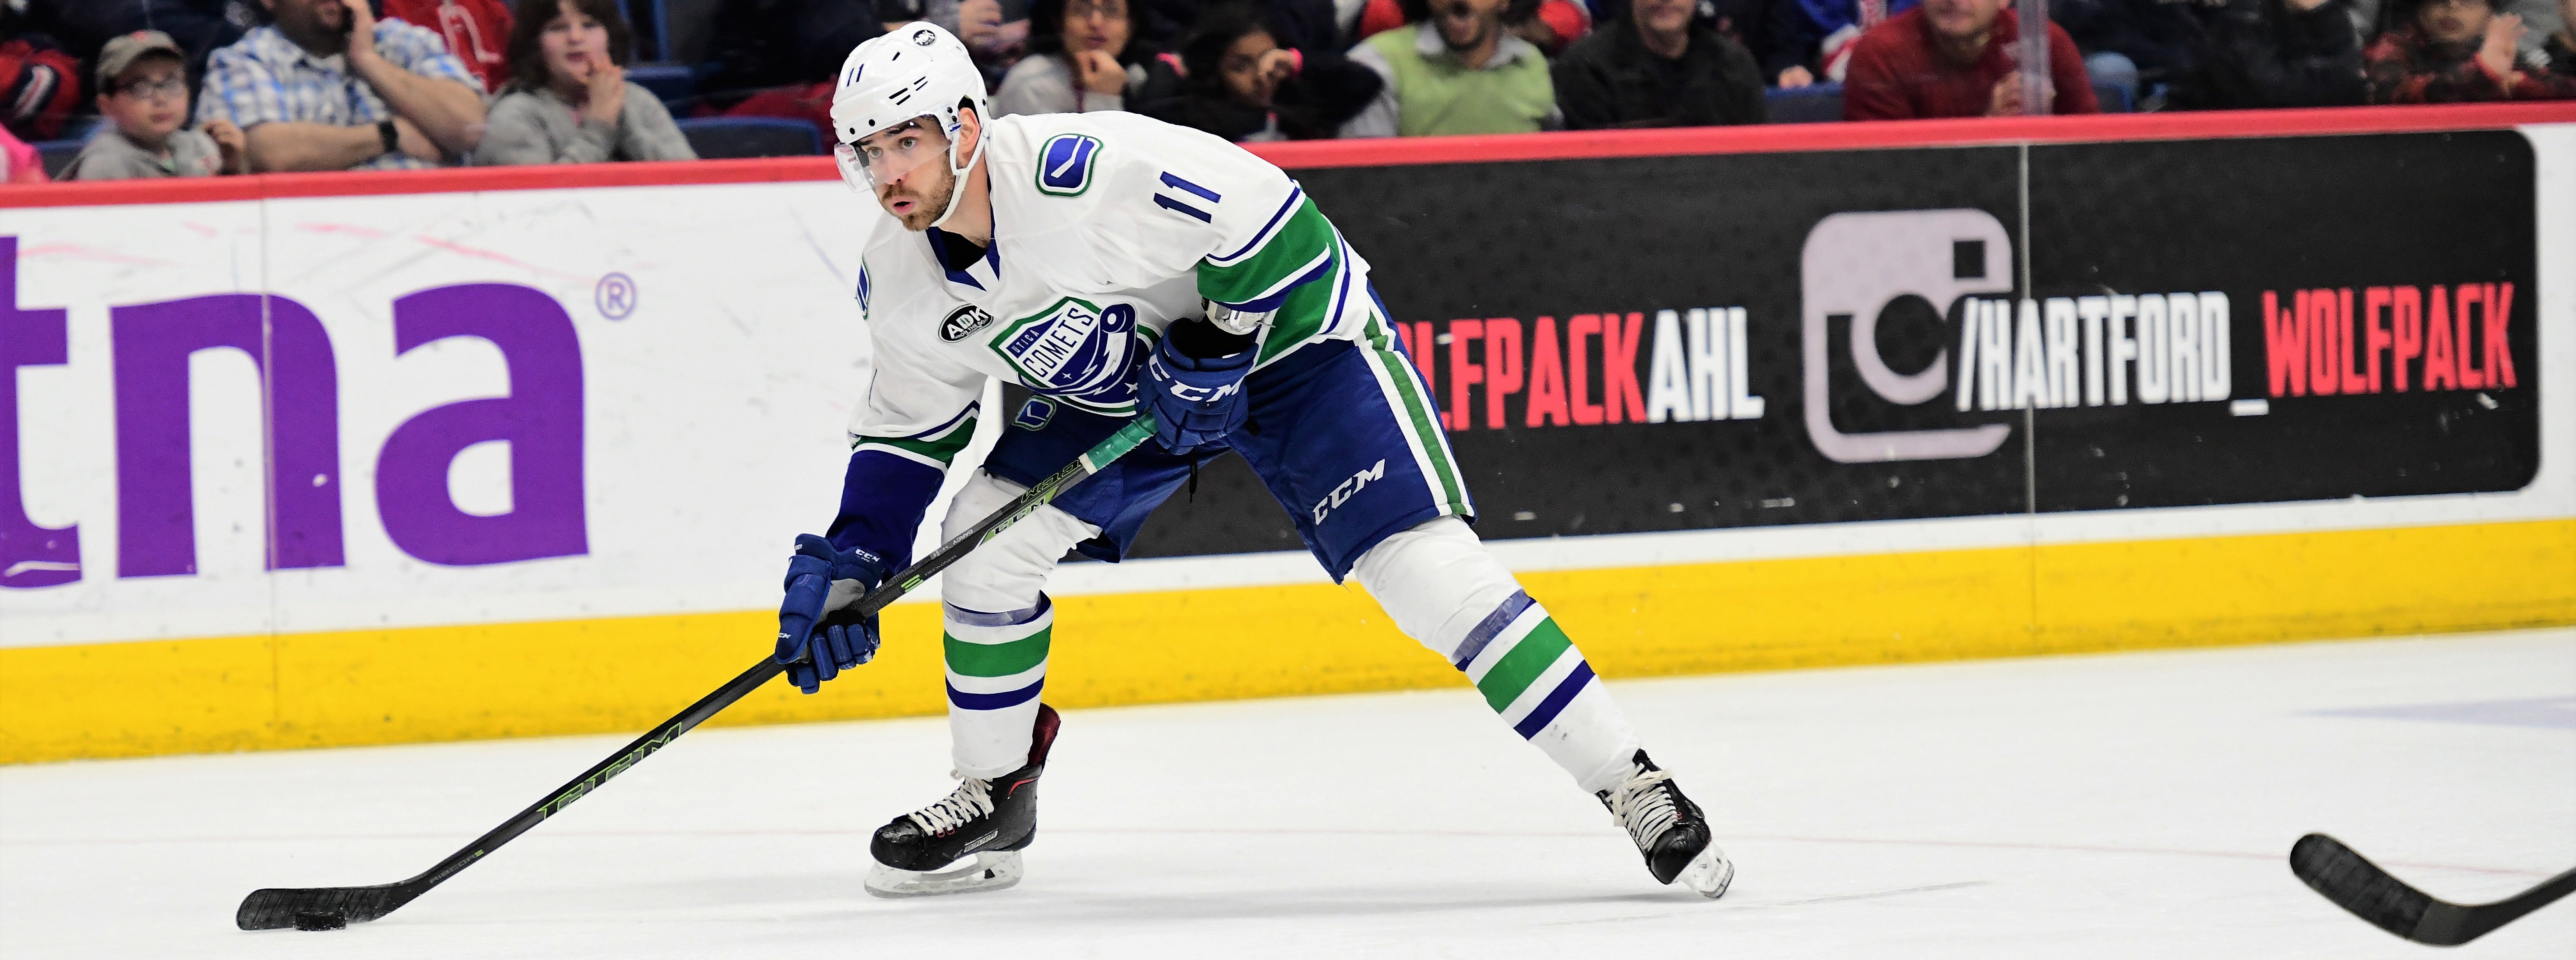 COMETS BLANK WOLF PACK IN ROAD TRIUMPH